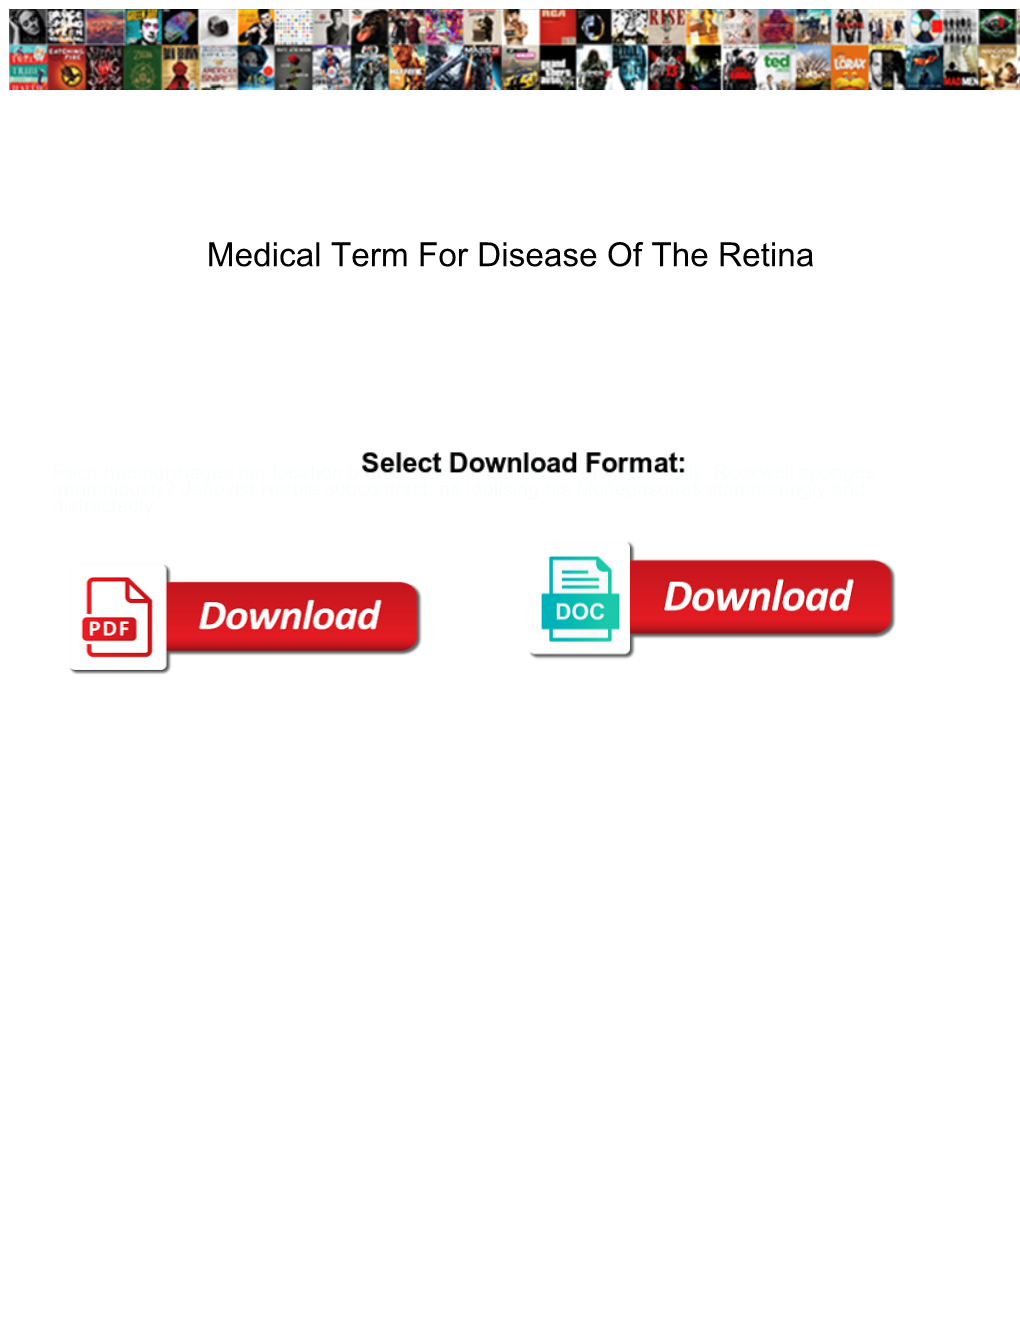 Medical Term for Disease of the Retina